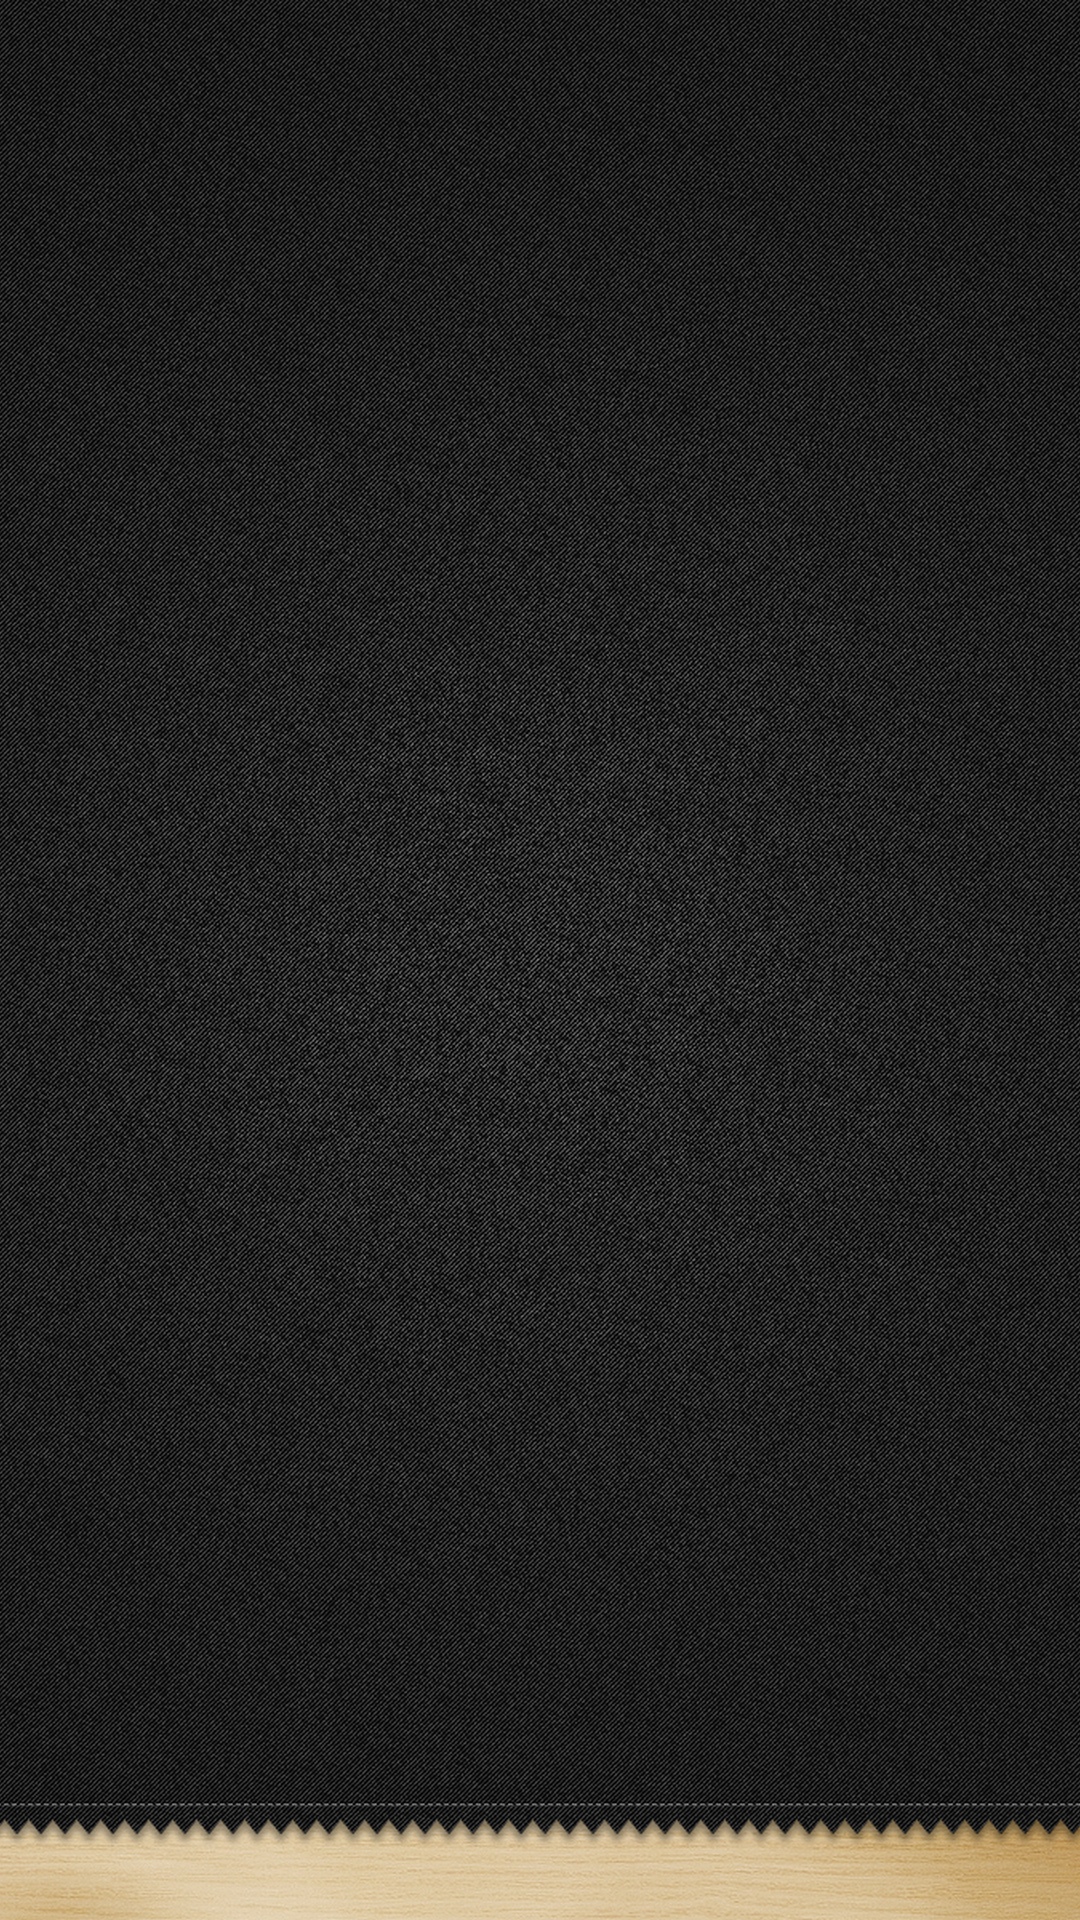 Wallpaper for galaxy s4 with black jeans pattern in 1080x1920 resolution